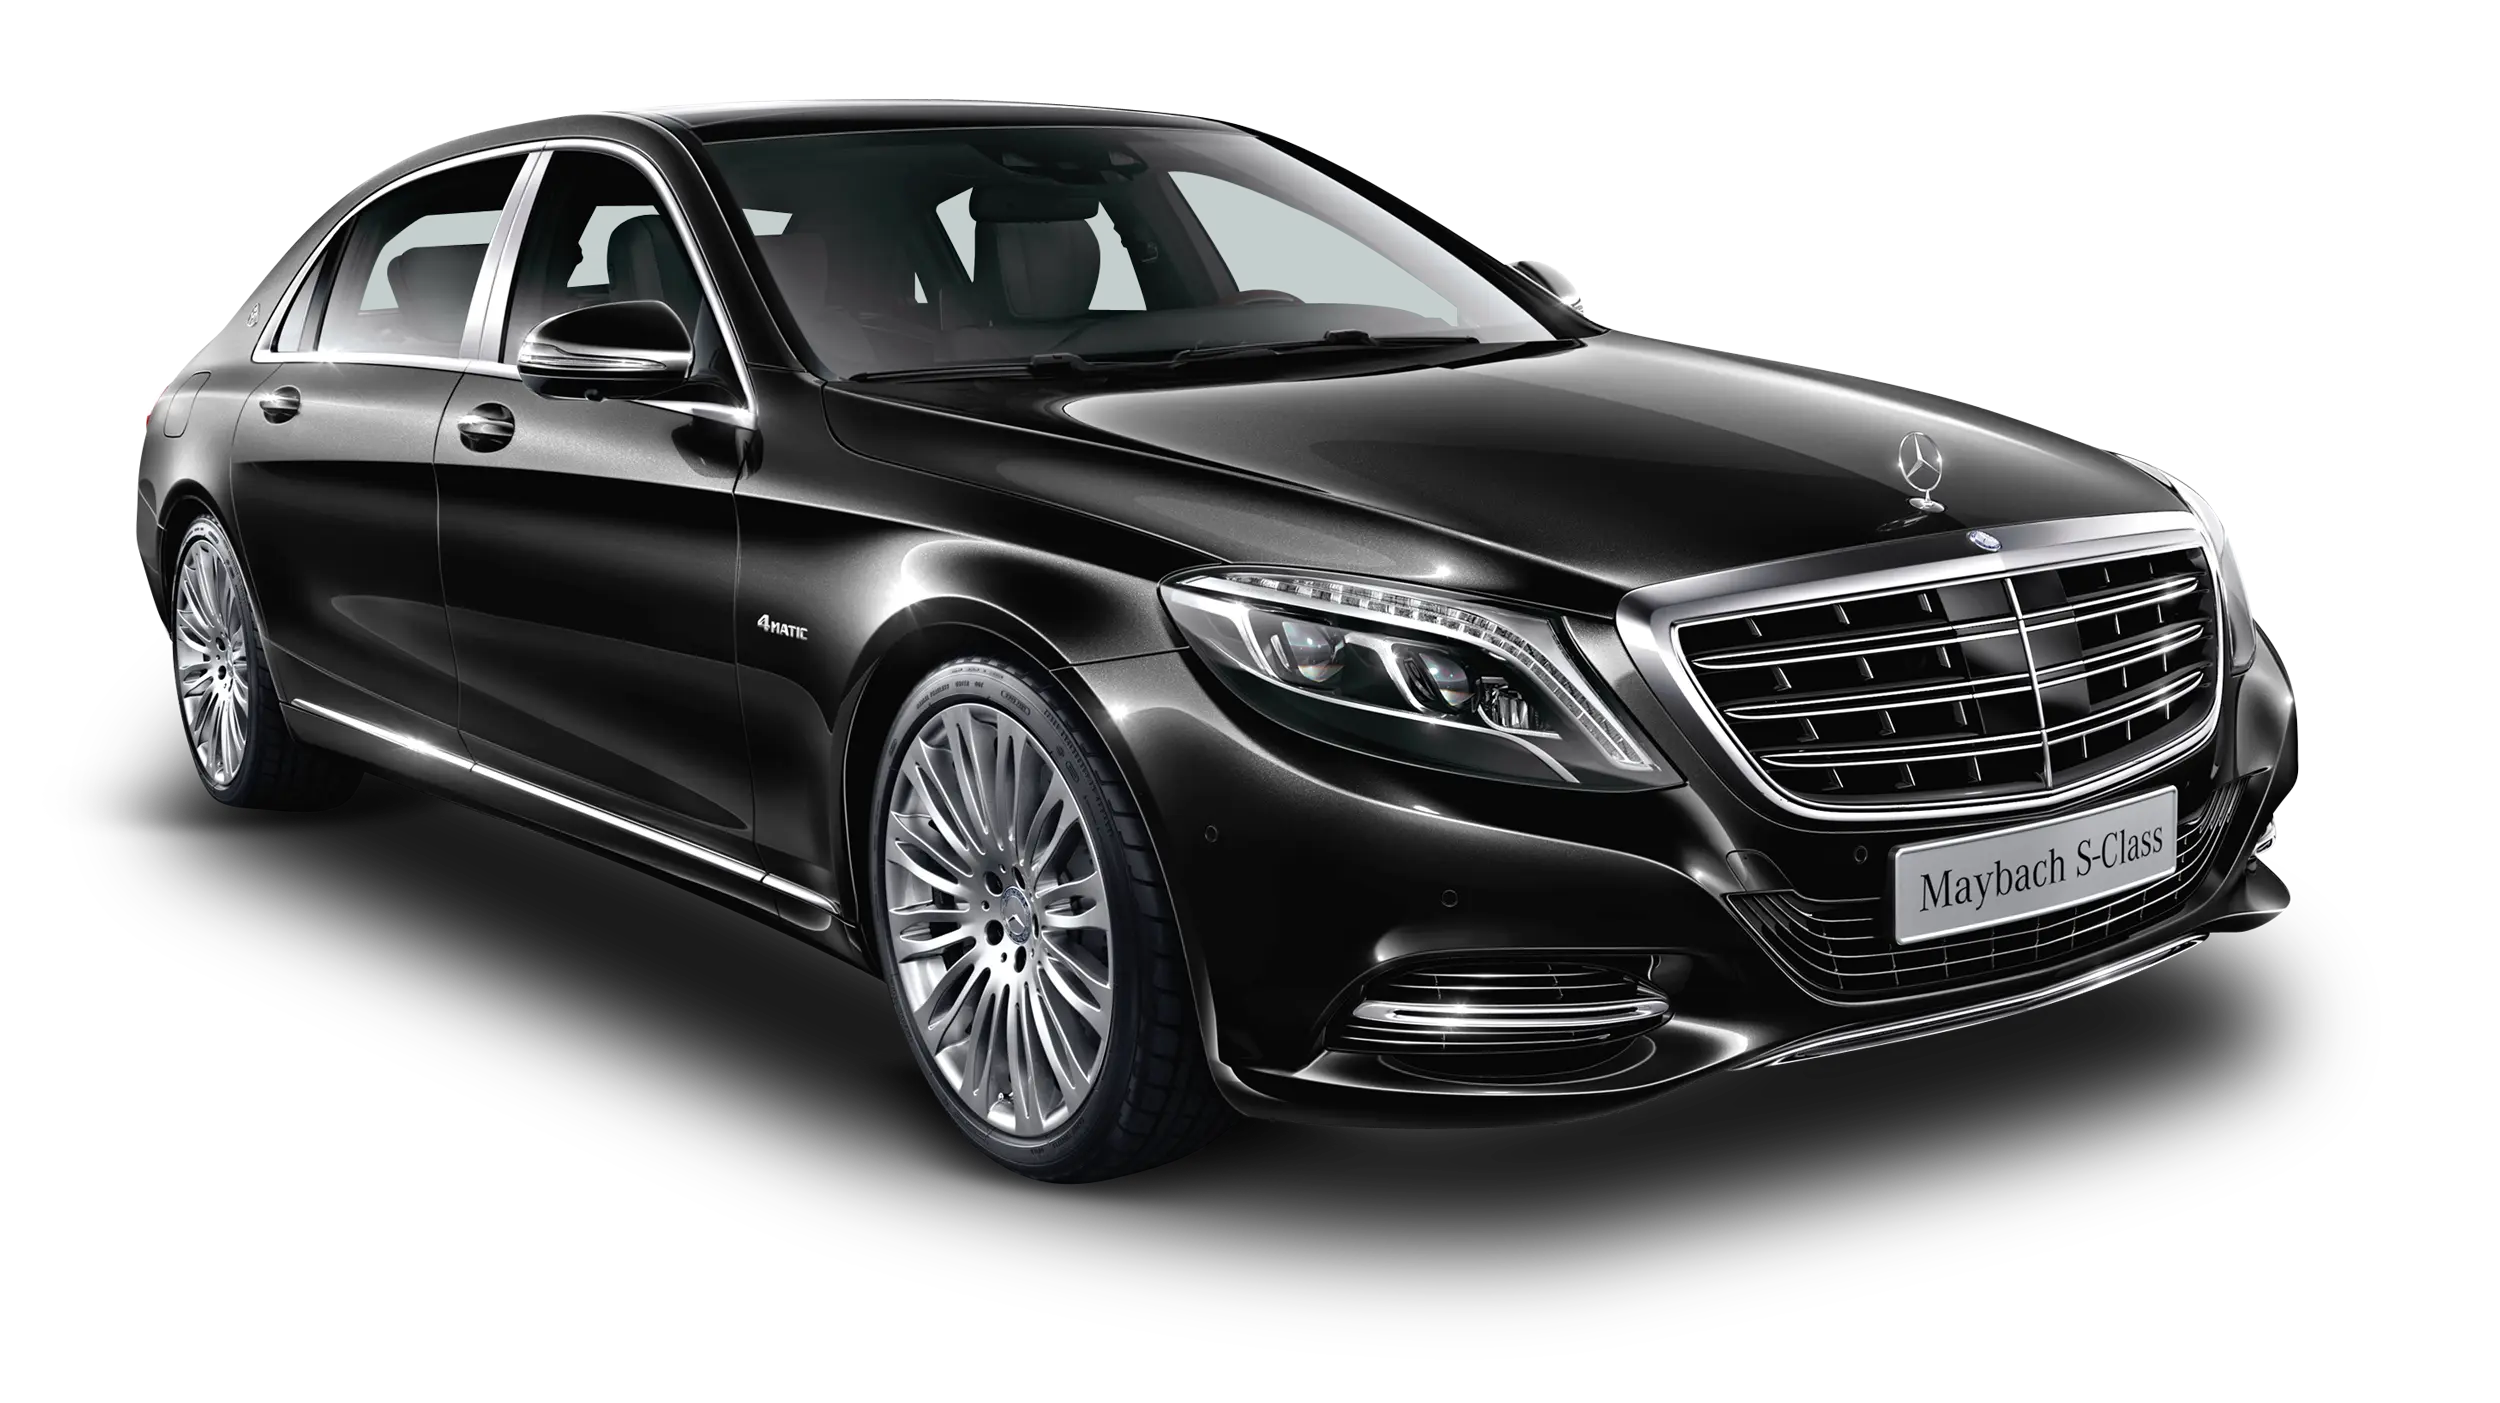 Queen Cars Rent A Car - Best Rent A Car & Limousine Services in Doha, State of Qatar | Services - TIRES, STEERING & SUSPENSION